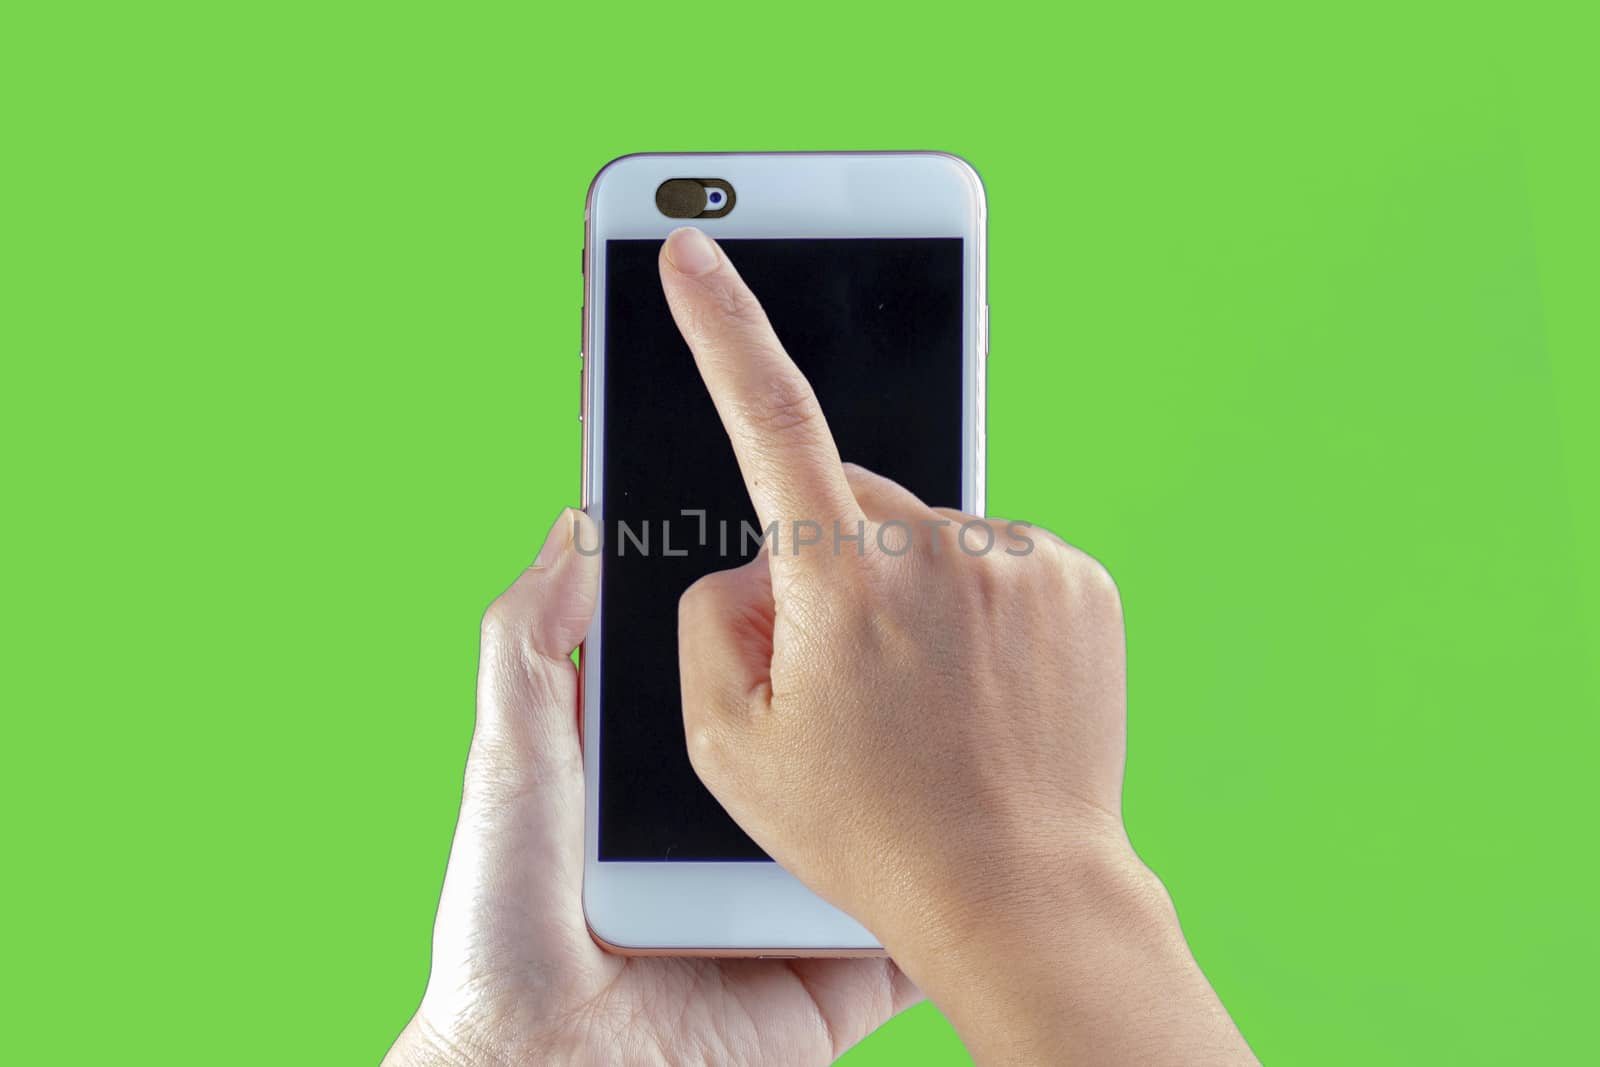 Camera privacy cover slide, for front camera cover for smart device hand hold on a green background by oasisamuel